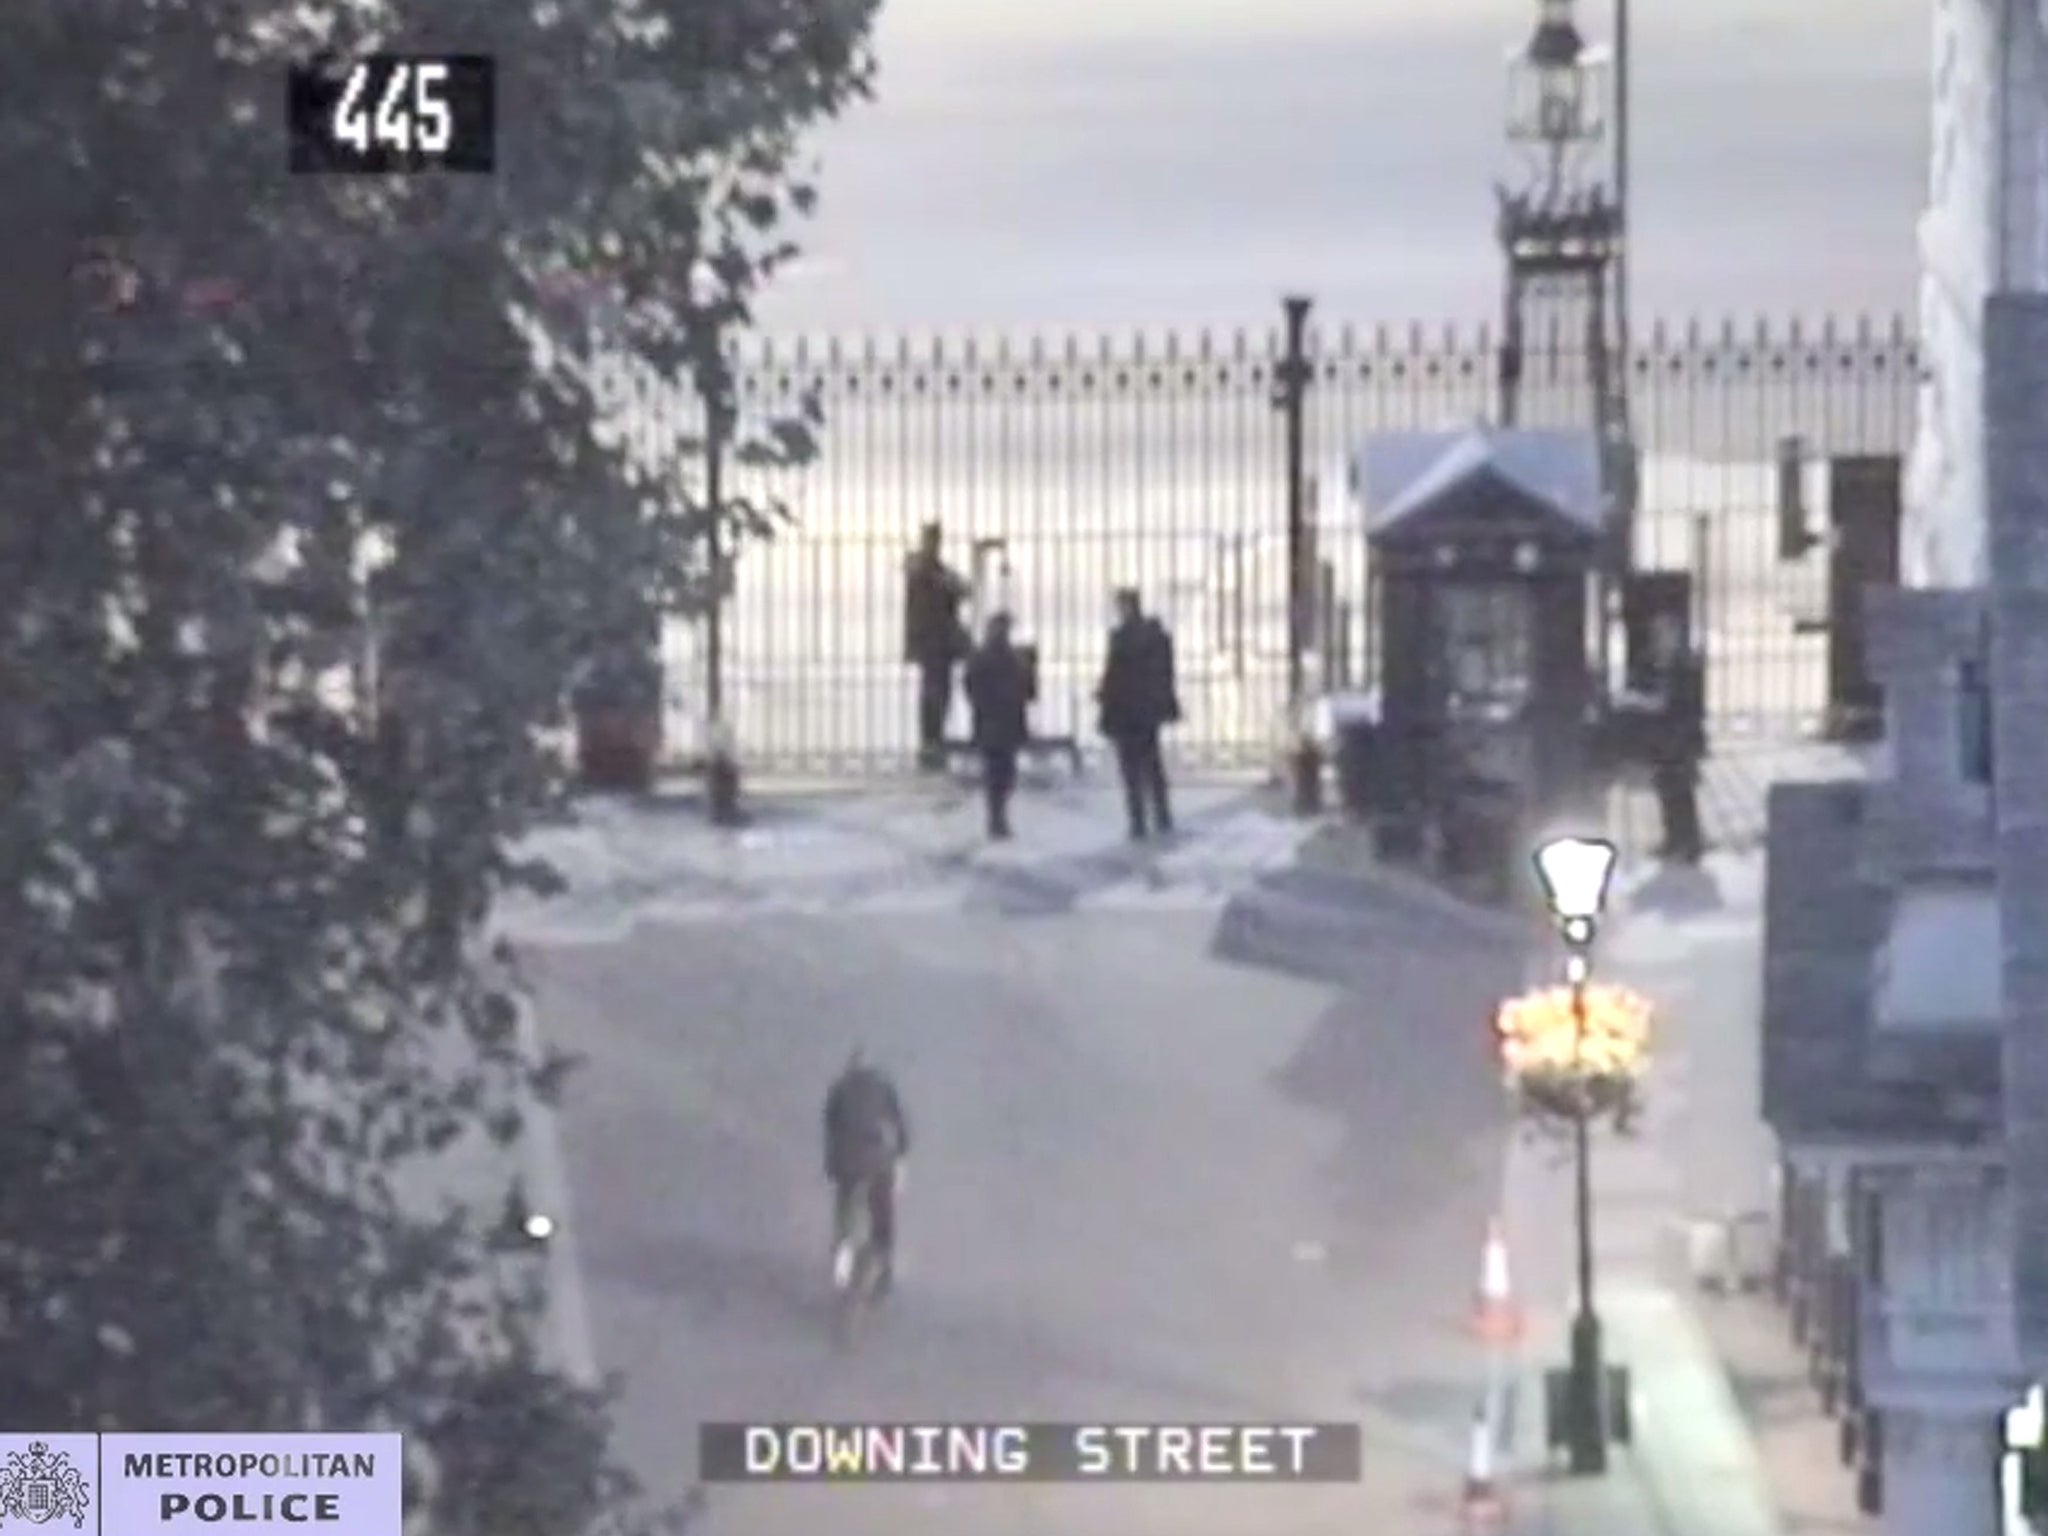 CCTV of Andrew Mitchell (bottom left) approaching officers prior to an exchange with Metropolitan police officers at the gates of Downing Street